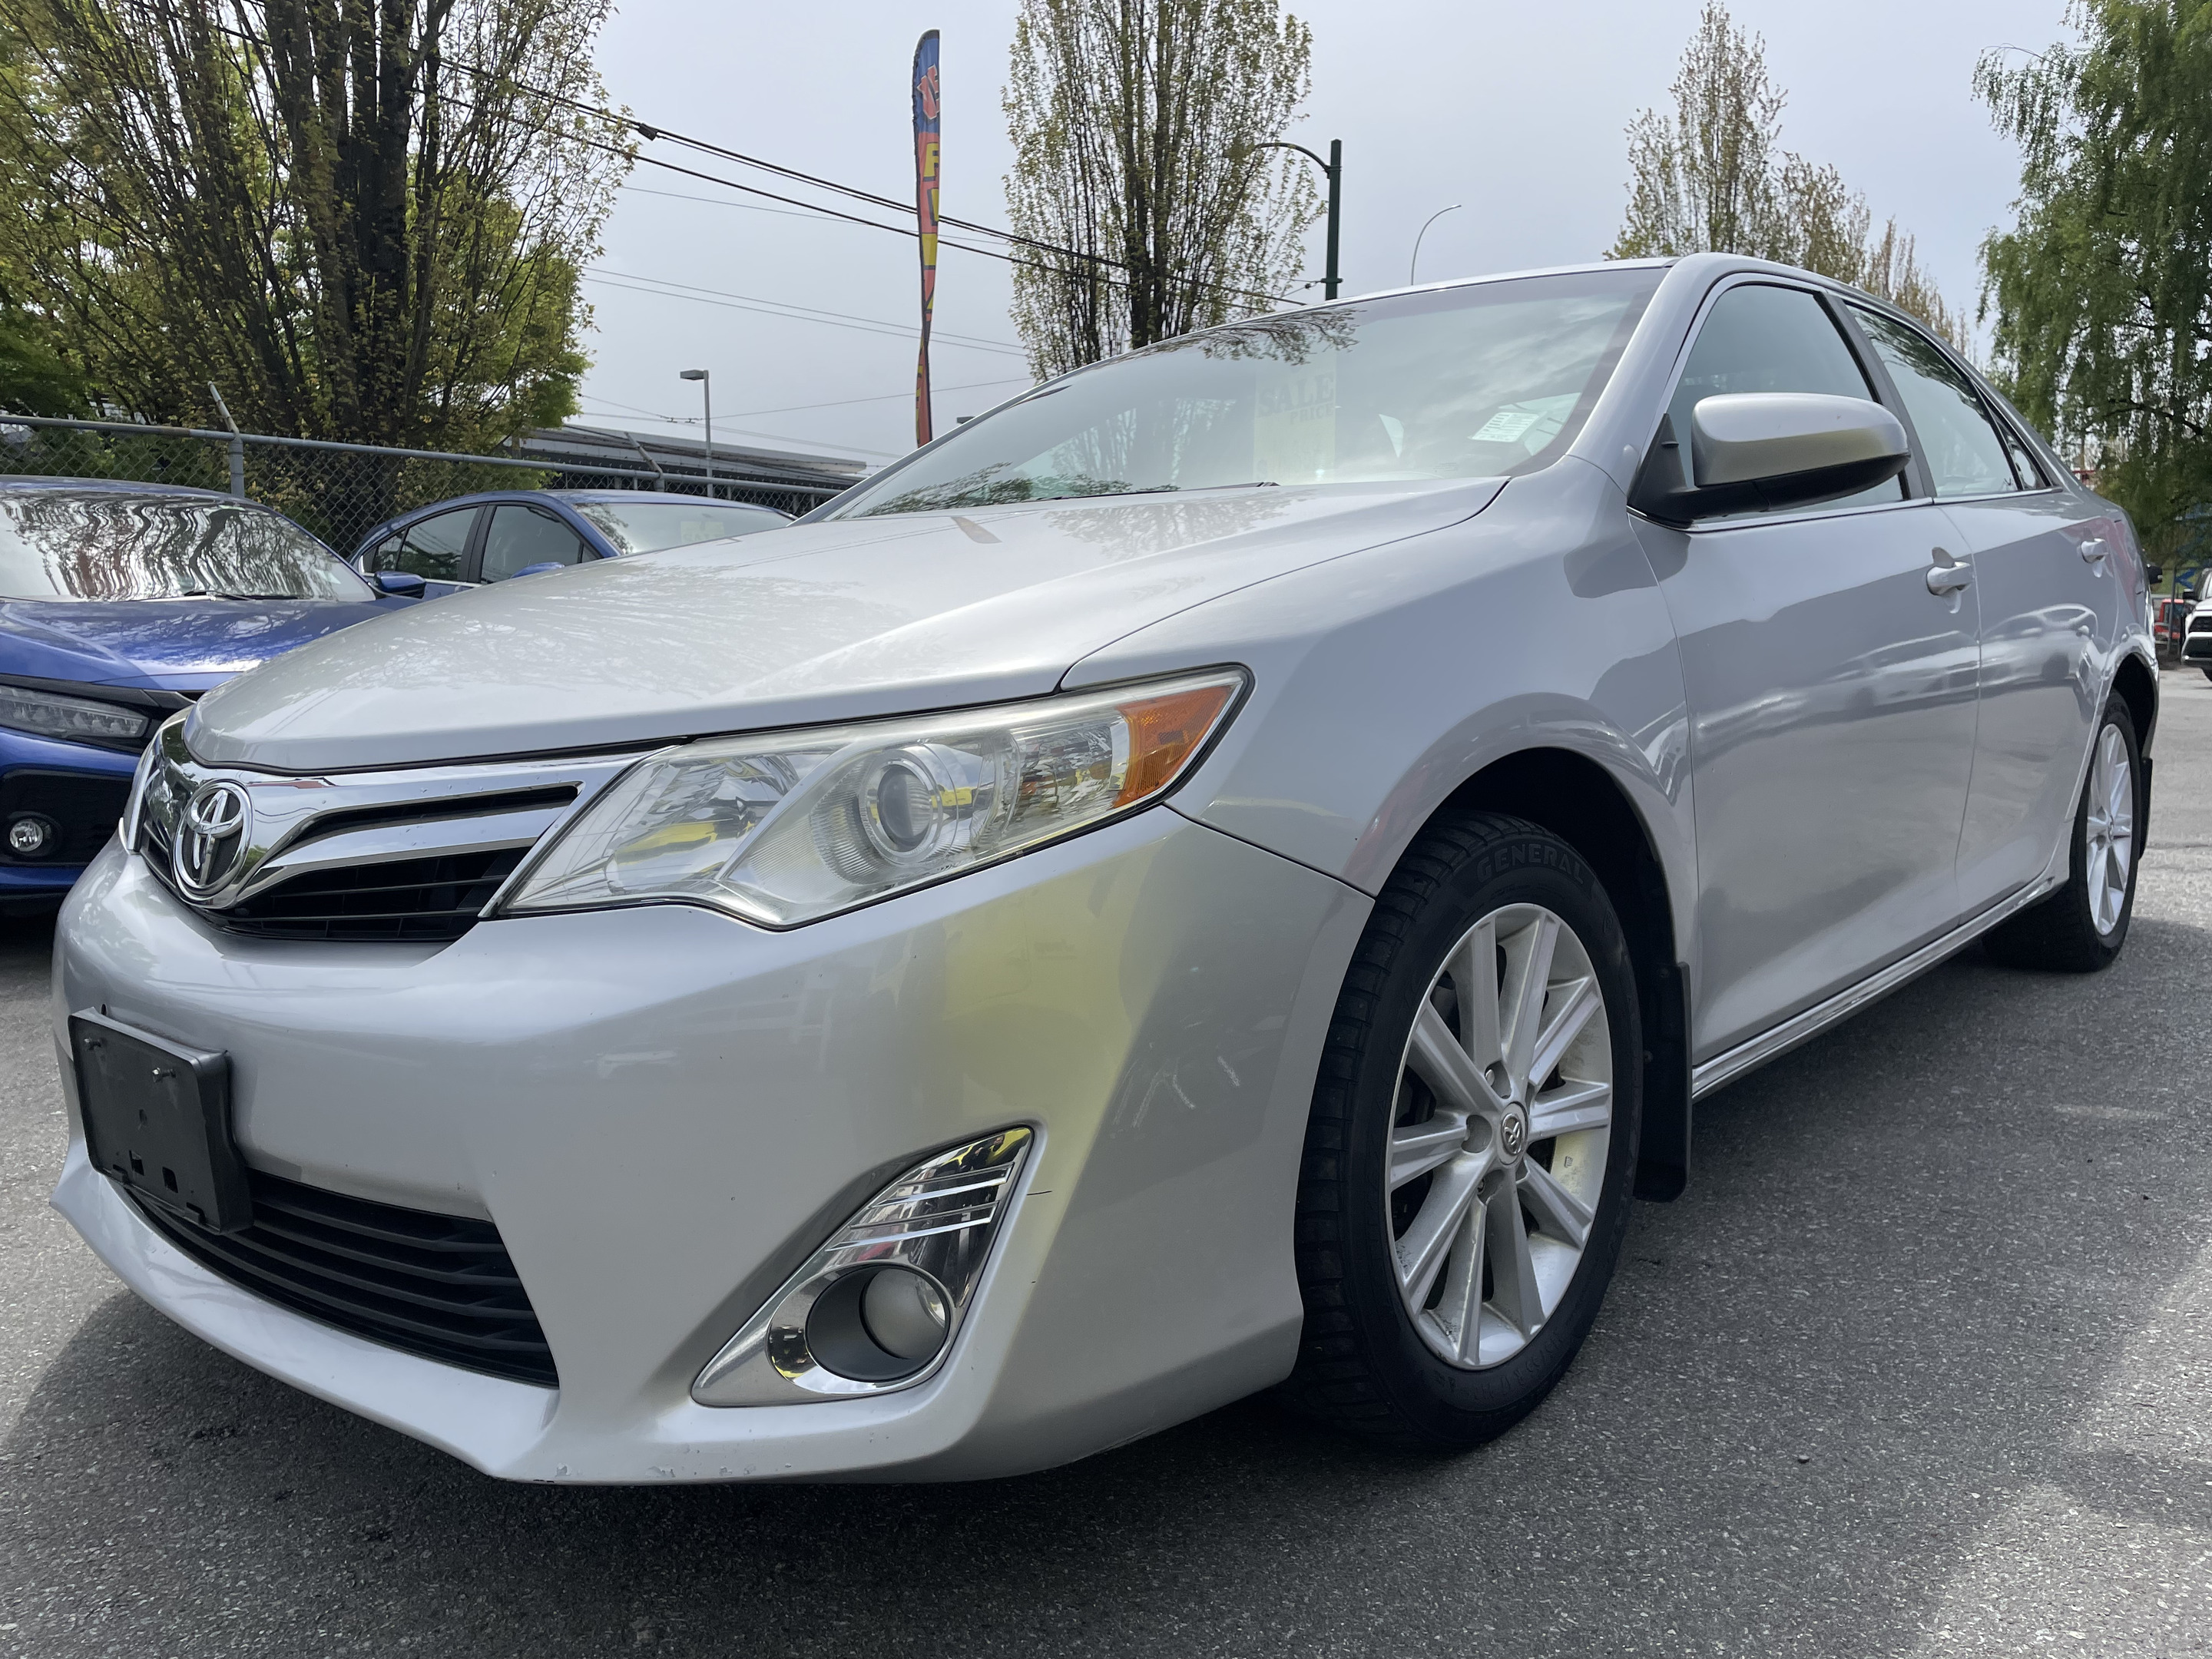 2012 Toyota Camry 4dr Sdn I4 Auto XLE